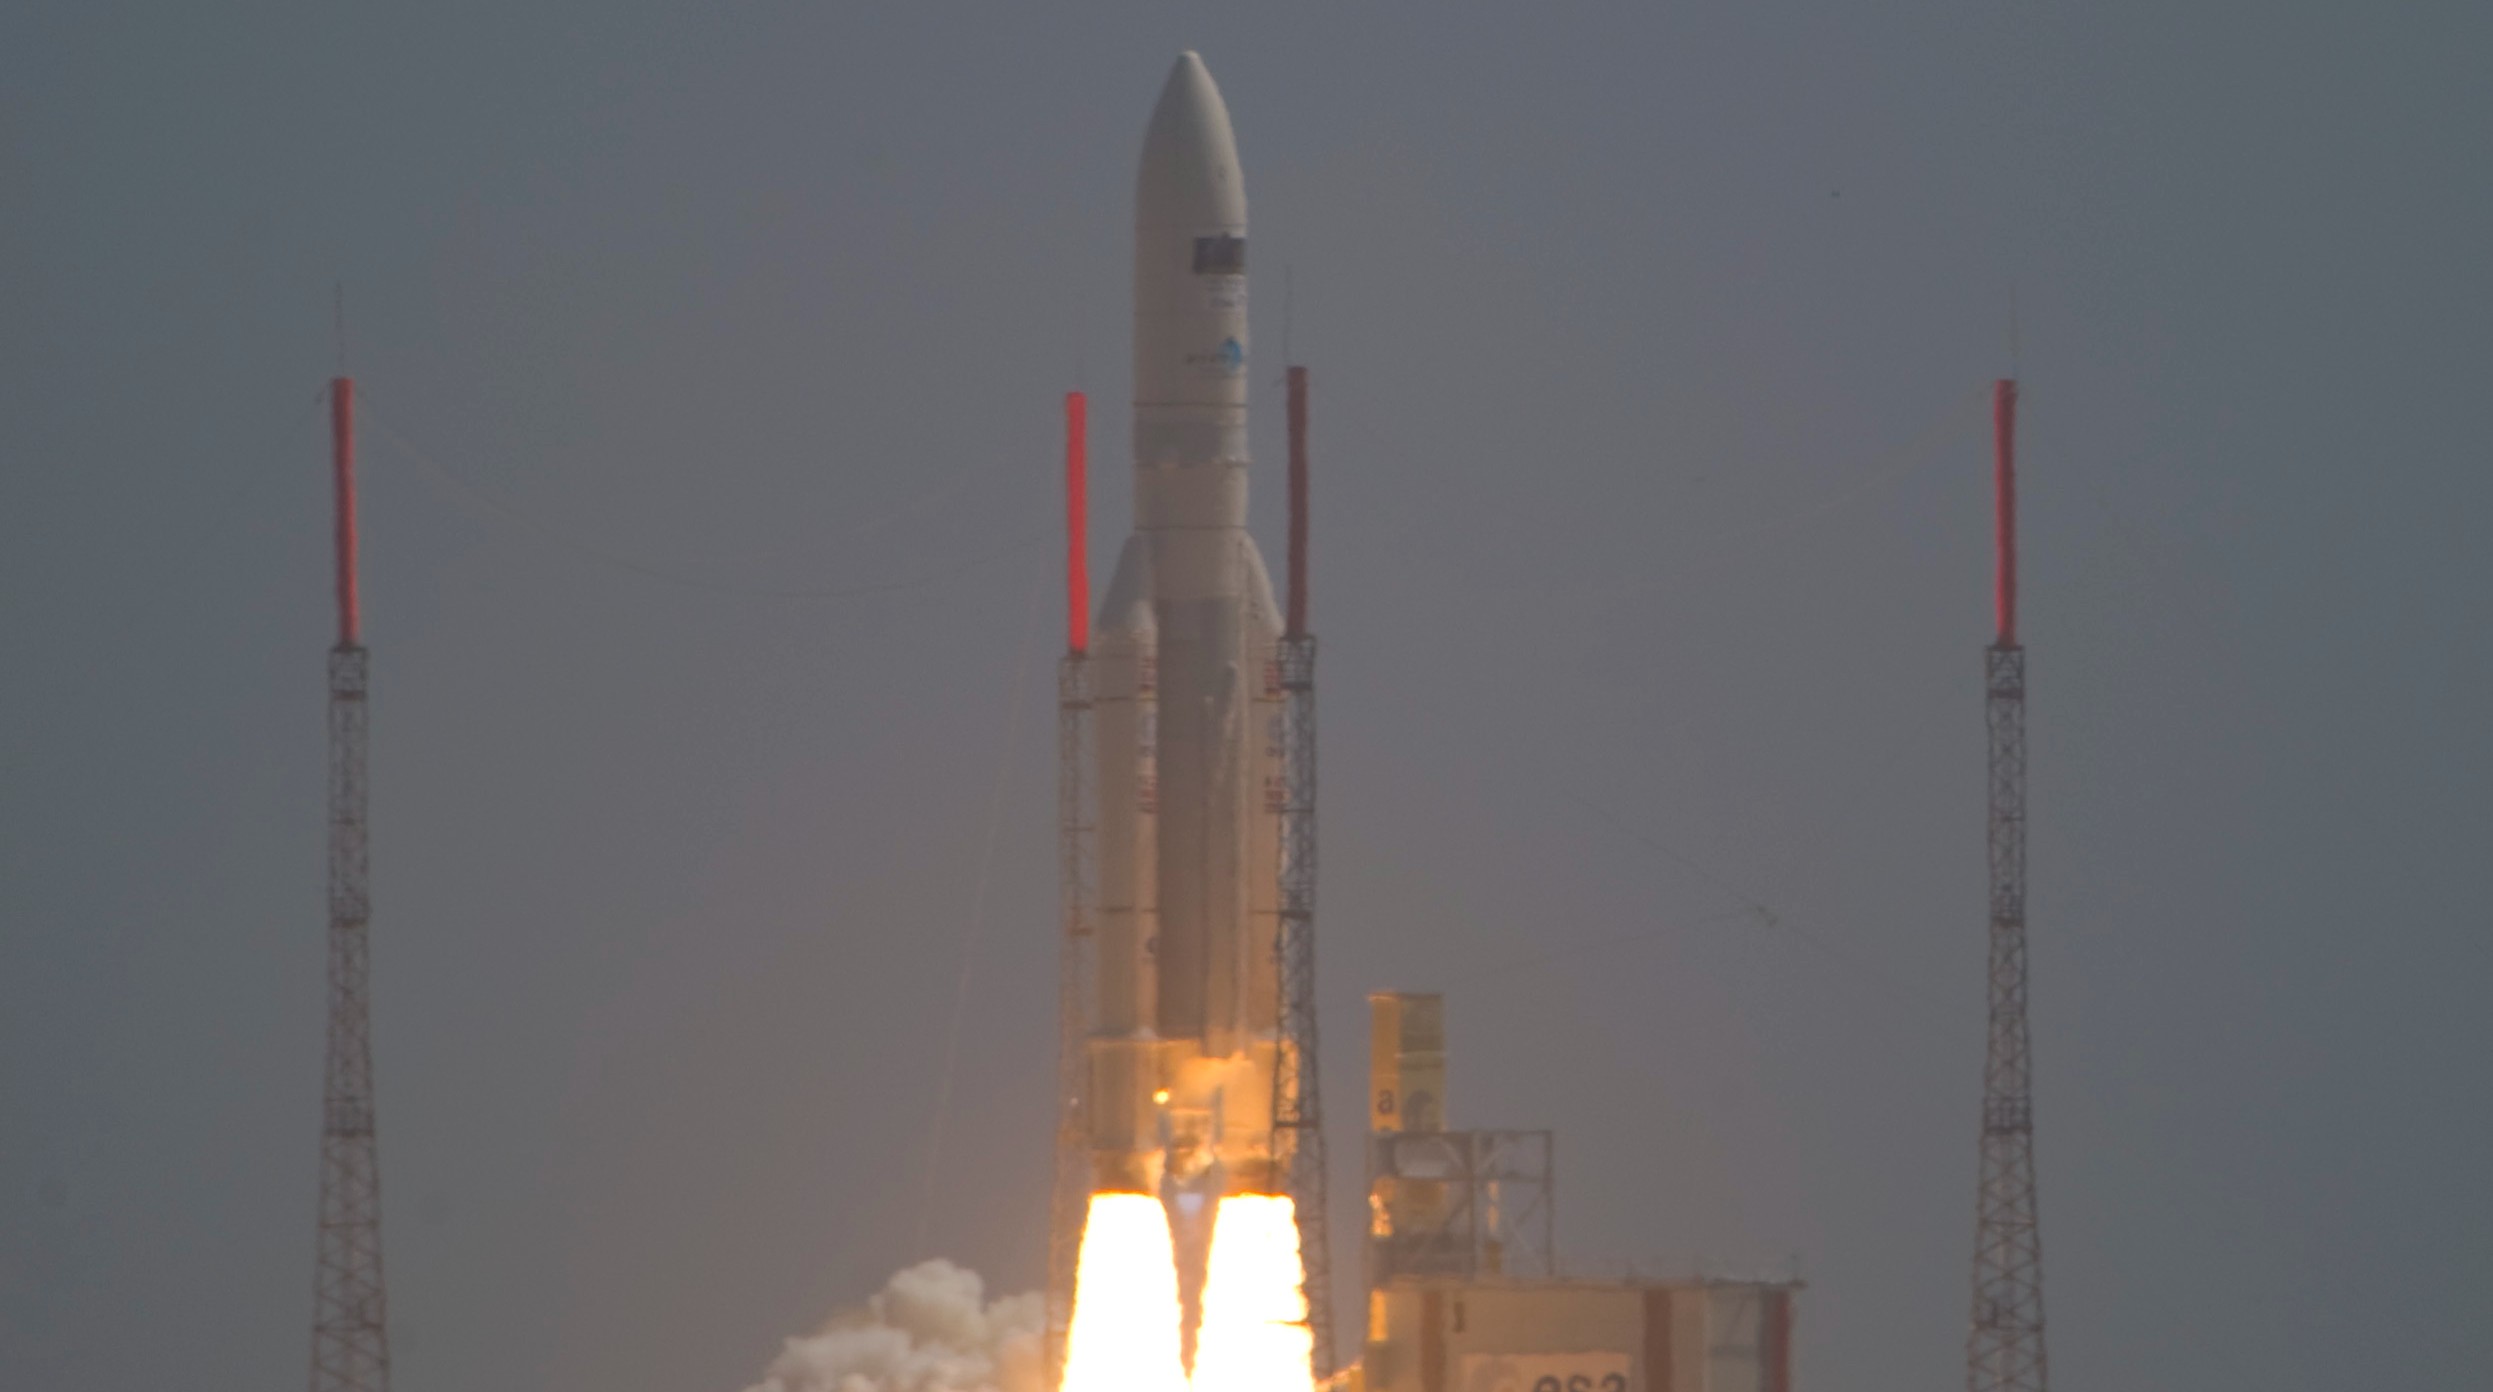 a white ariane 5 rocket launches from french guiana on may 14, 2009